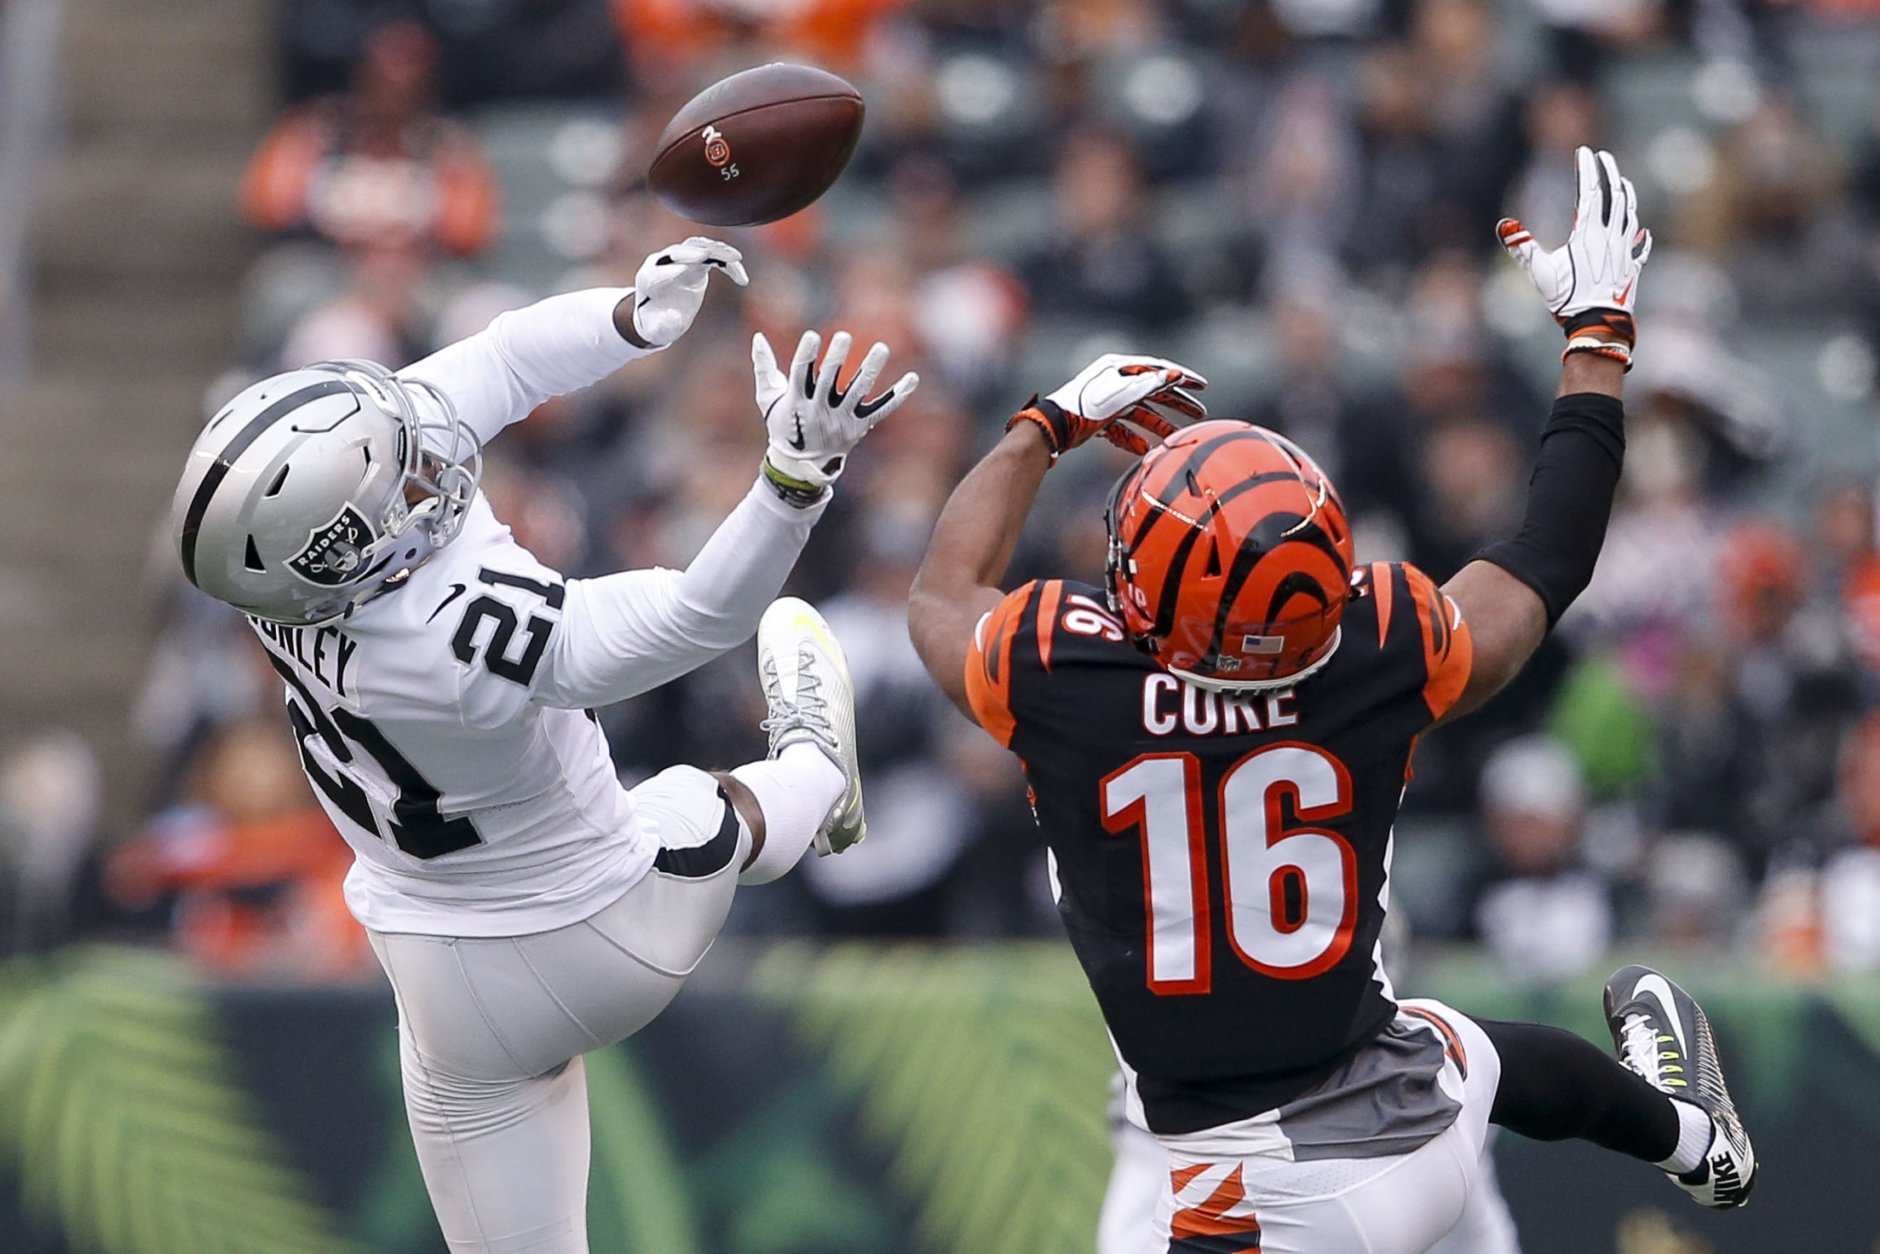 Oakland Raiders cornerback Gareon Conley (21) misses a pass contested by Cincinnati Bengals wide receiver Cody Core (16) in the second half of an NFL football game, Sunday, Dec. 16, 2018, in Cincinnati. (AP Photo/Gary Landers)